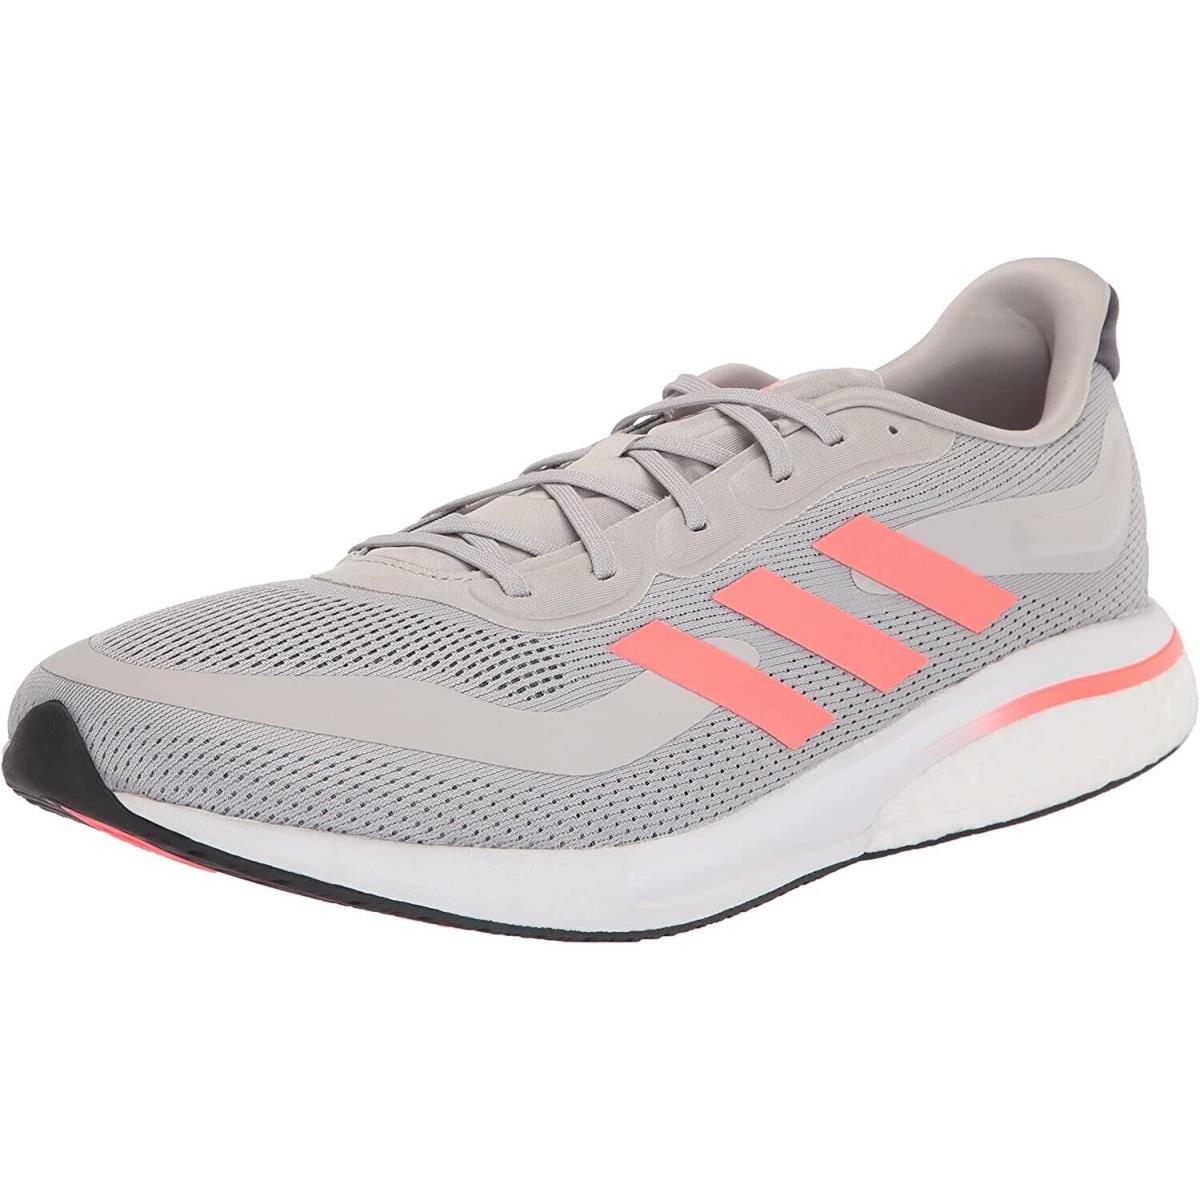 Adidas Men`s Supernova M Running Shoe JX2961 Size 10 US IN The Box - Grey Two/Turbo/Grey Two